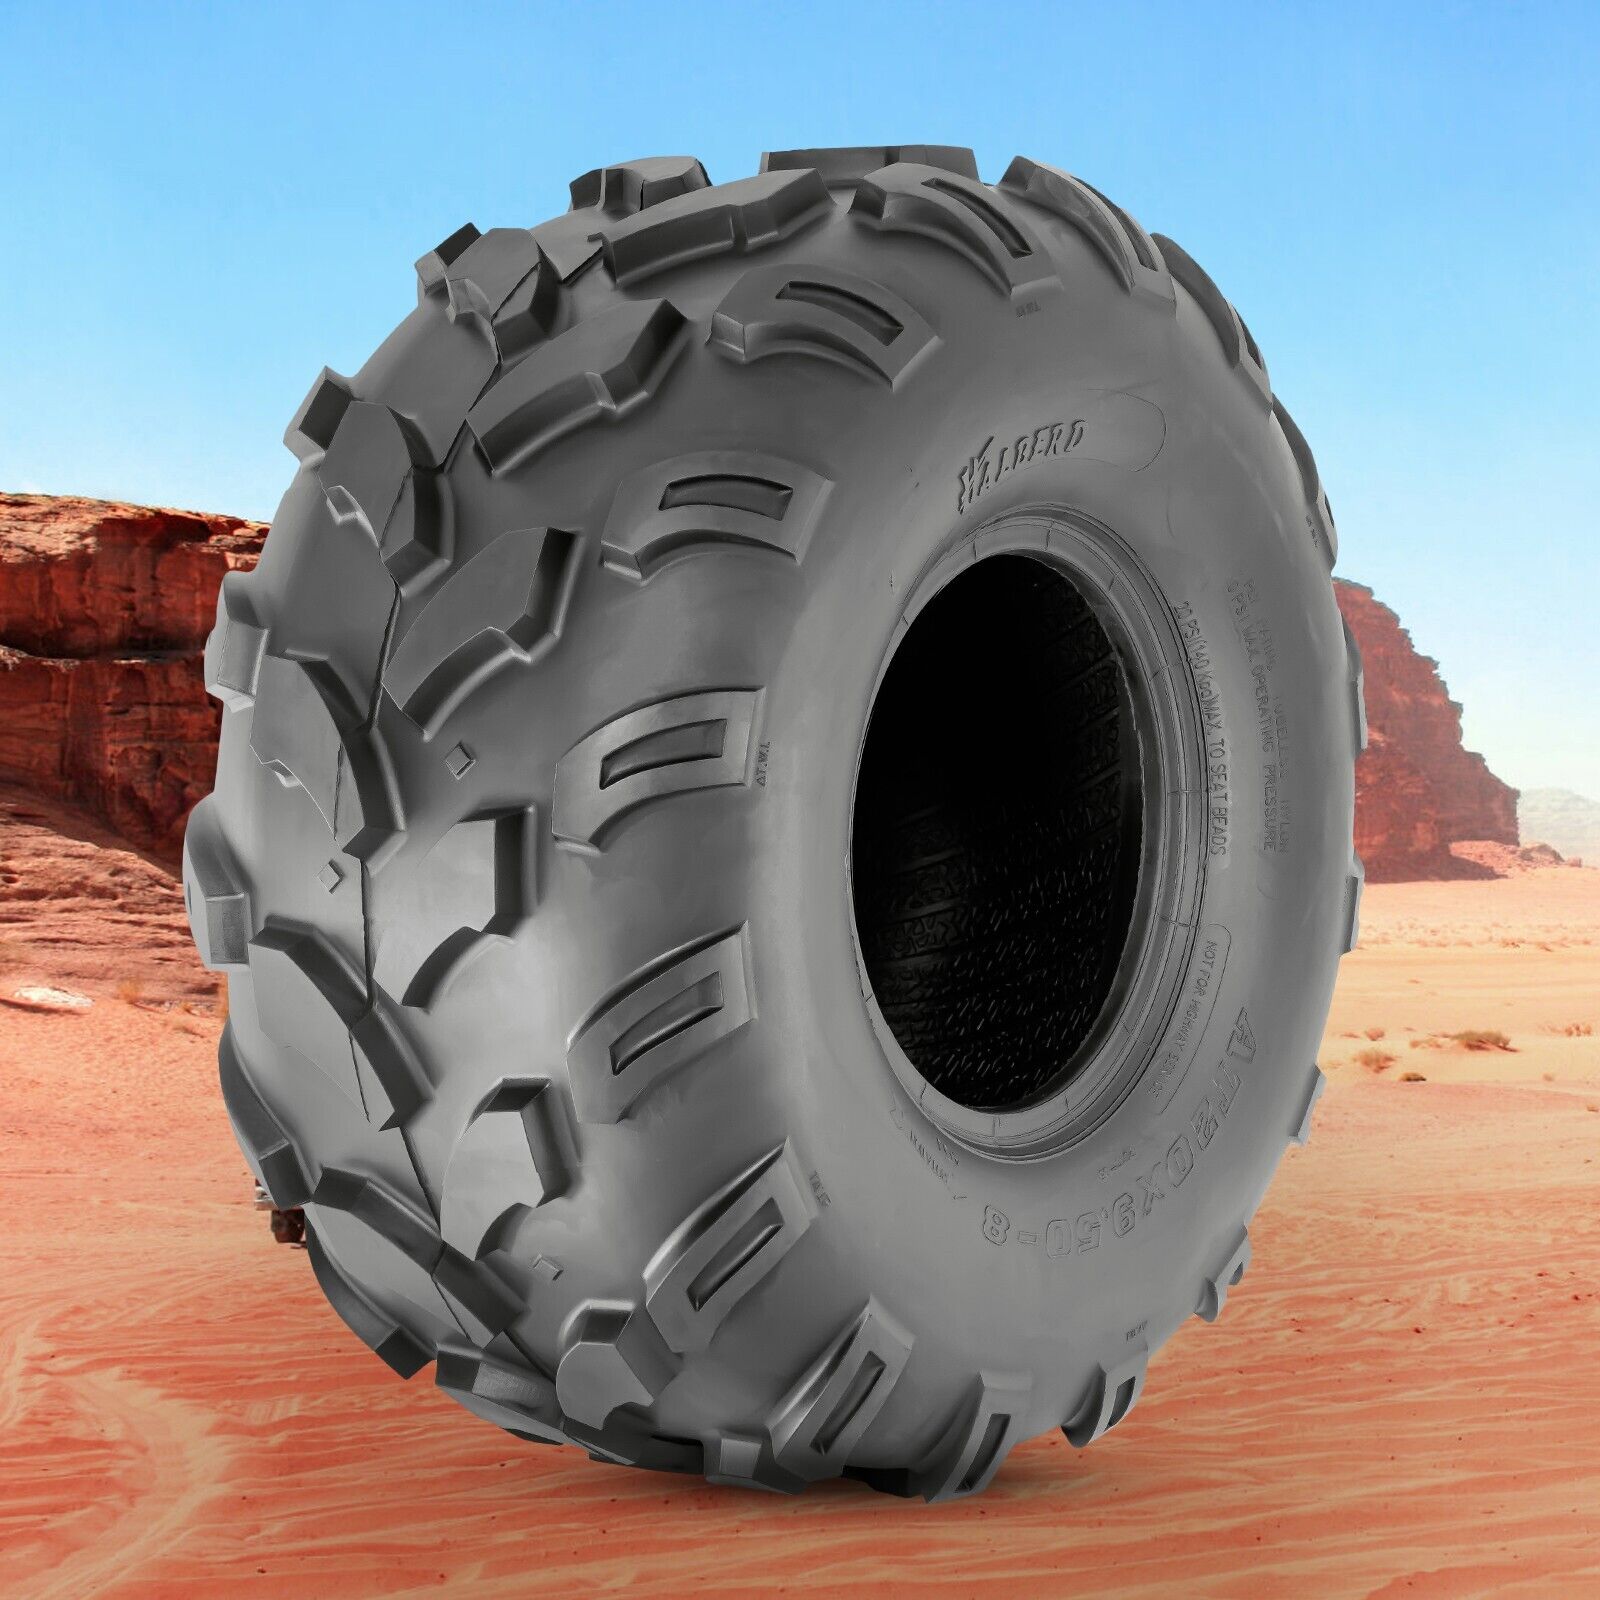 Upgrade 20x9.50-8 ATV Tire 20x9.50x8 Replacement 4Ply Heavy Duty Tubeless Tyre